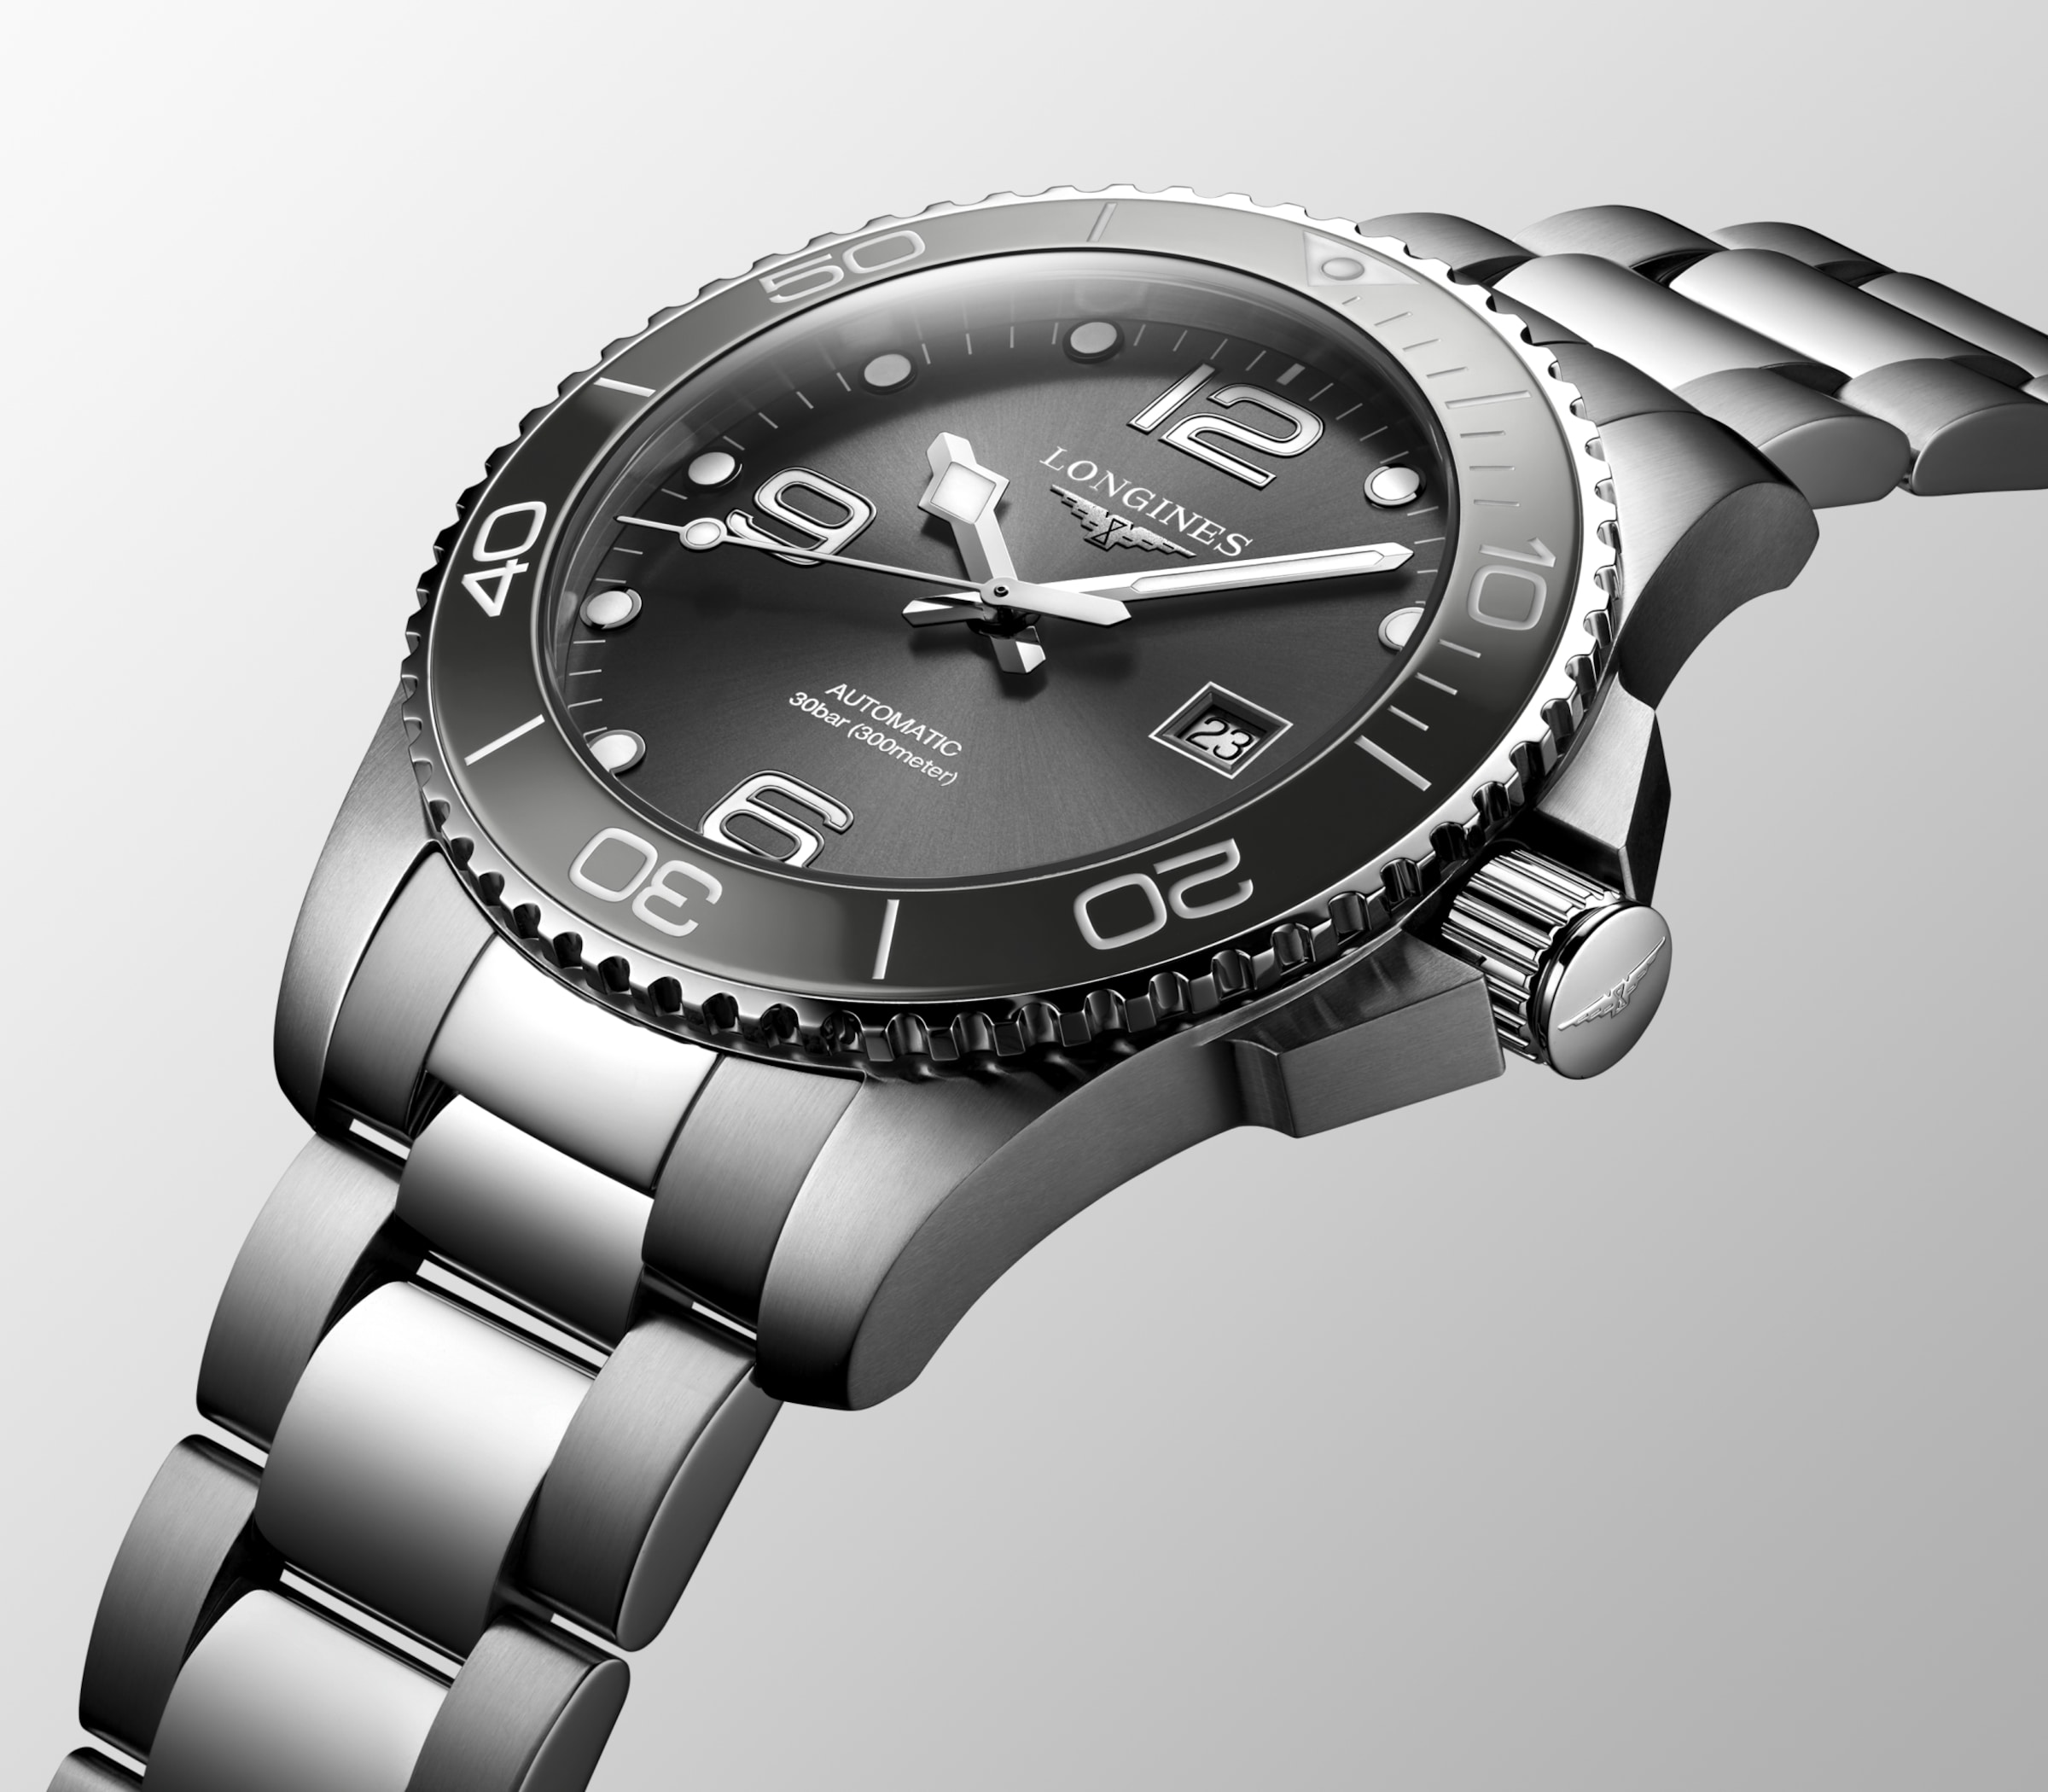 Longines HYDROCONQUEST Automatic Stainless steel and ceramic bezel Watch - L3.782.4.76.6